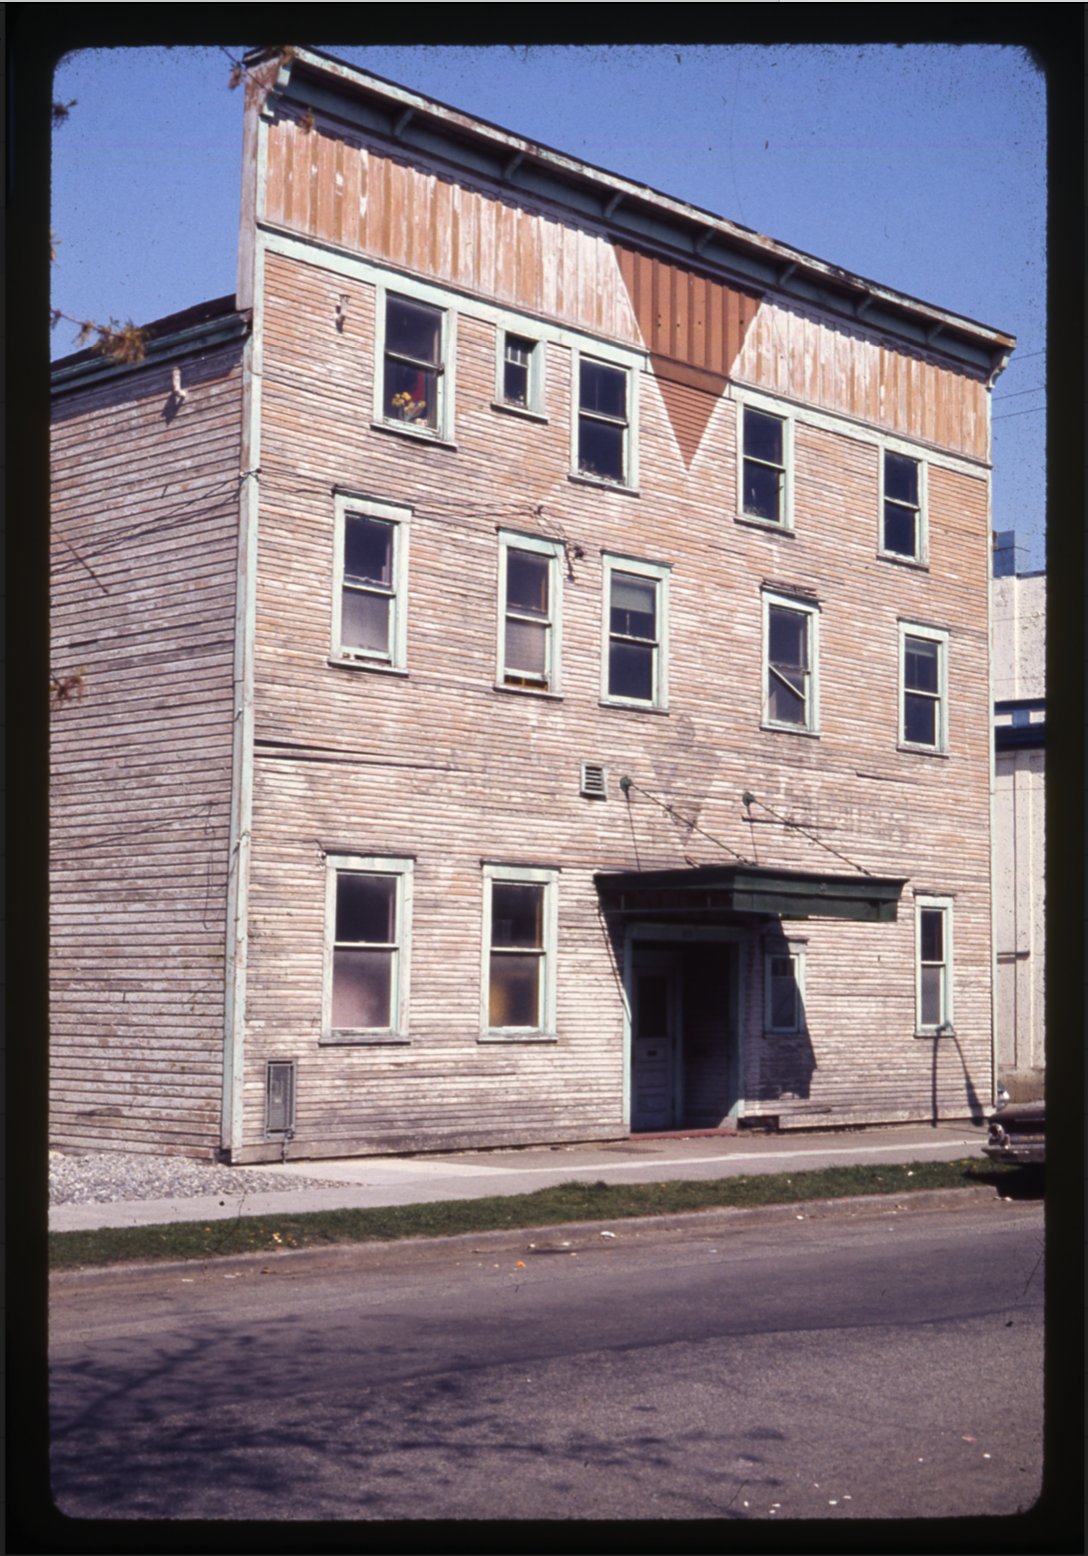 A colour photograph that looks north onto Western Front’s facade. The wooden siding is old and the paint faded.